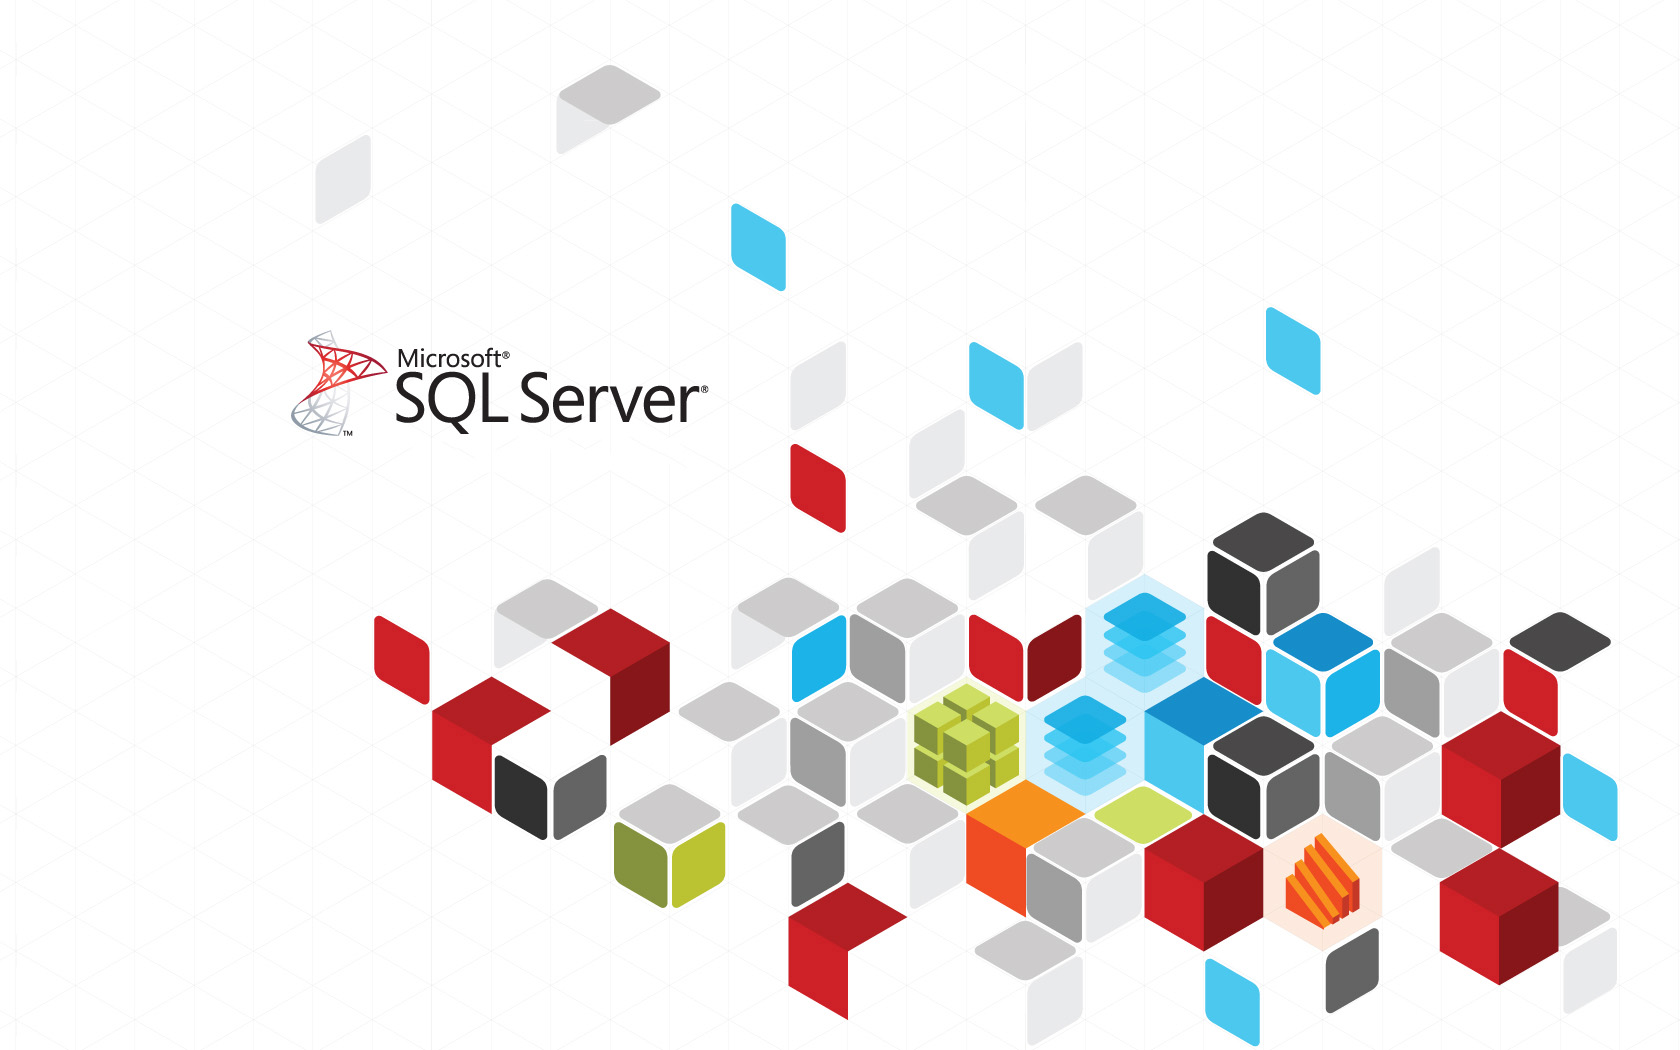 Learn how to manage Microsoft's SQL Server environment for under $20